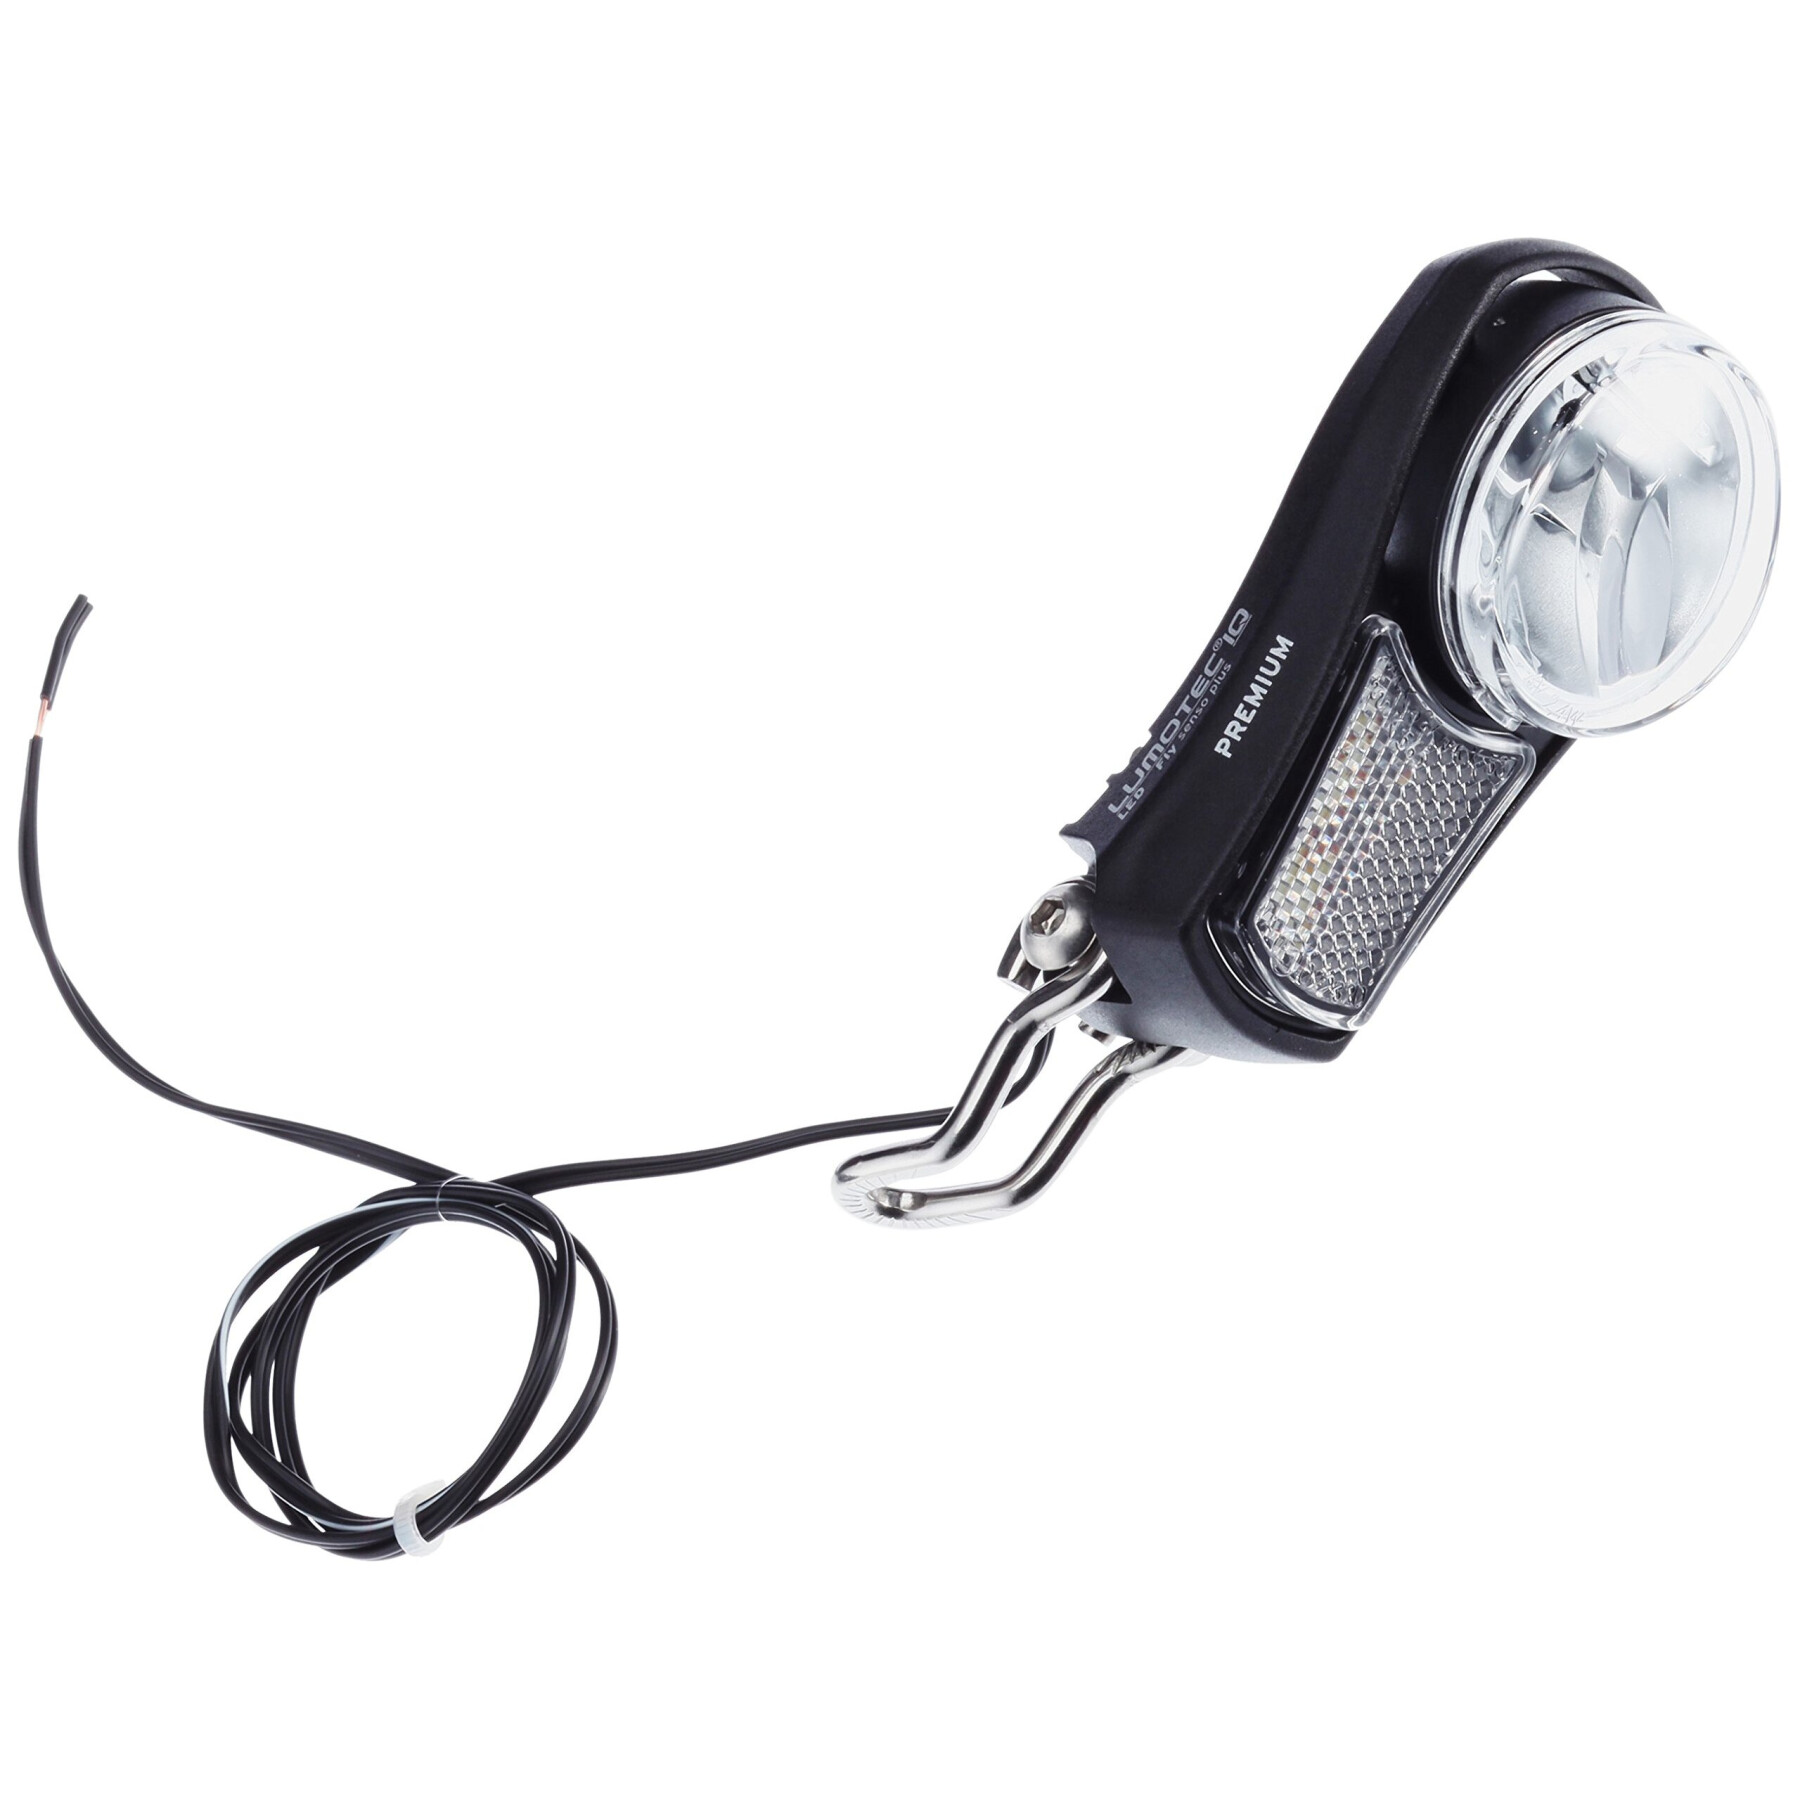 Front lighting with switch in. Busch & Müller iqfly premium